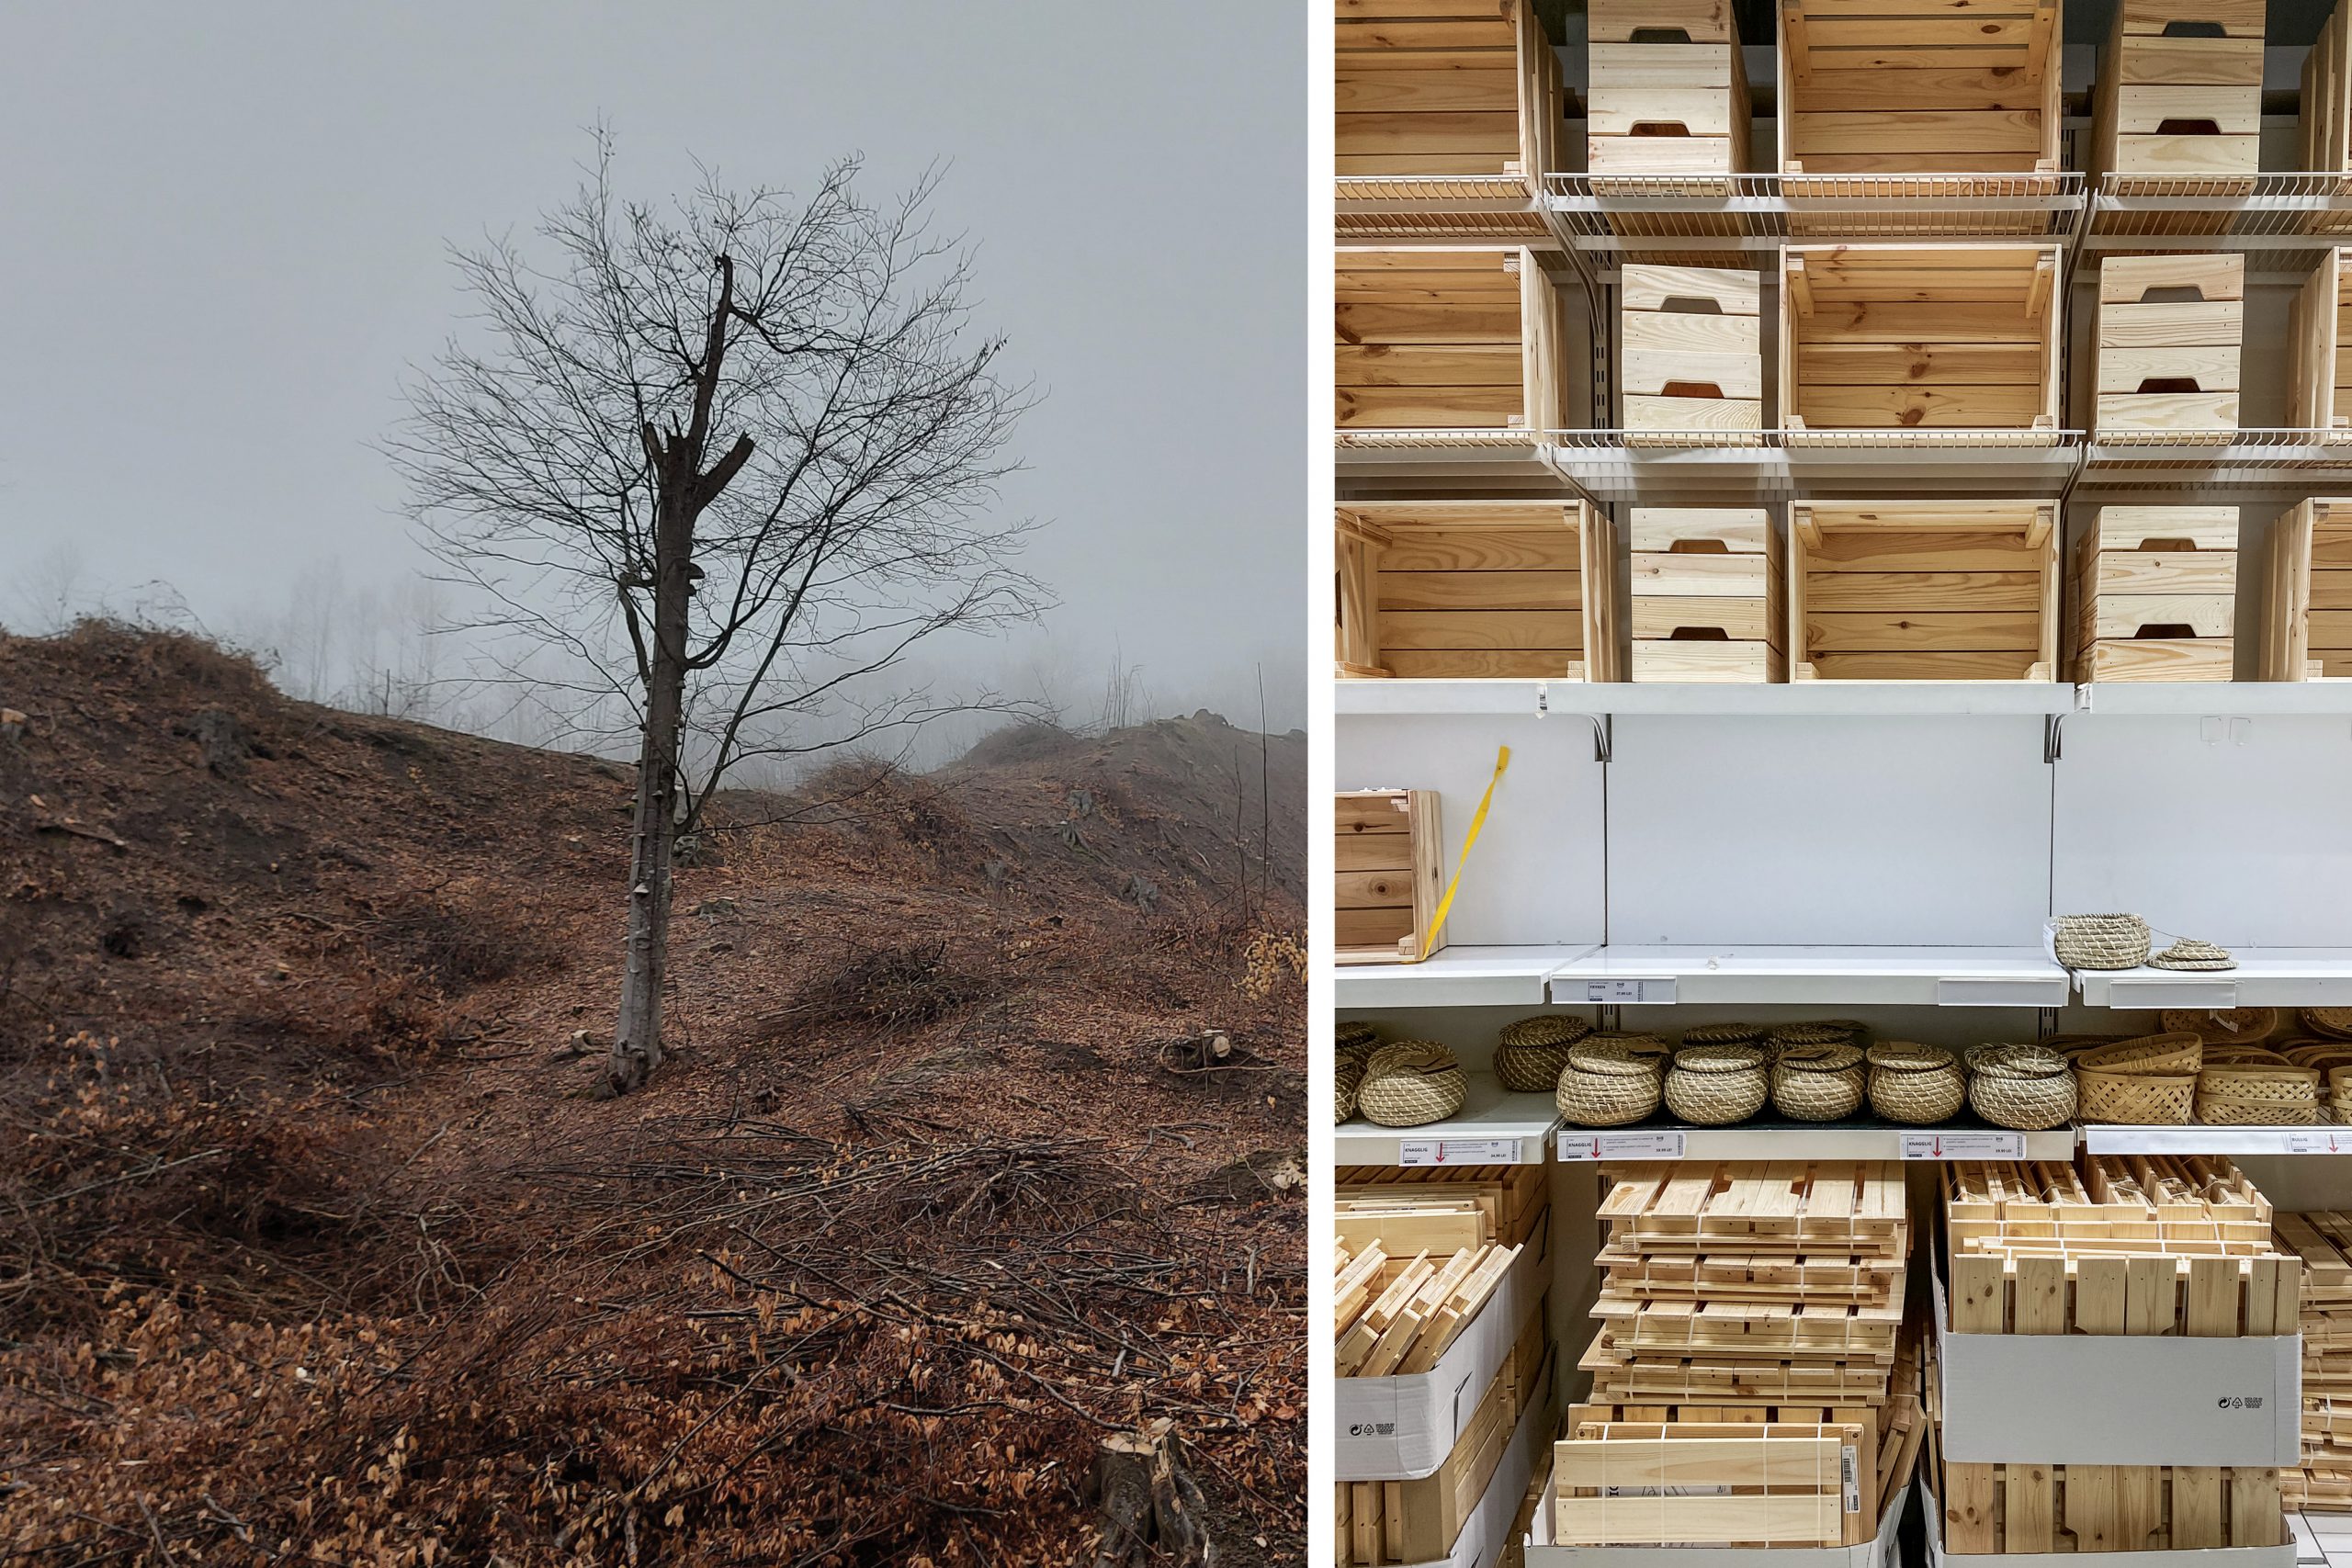 Ikea’s Race for the Last of Europe’s Old-Growth Forest